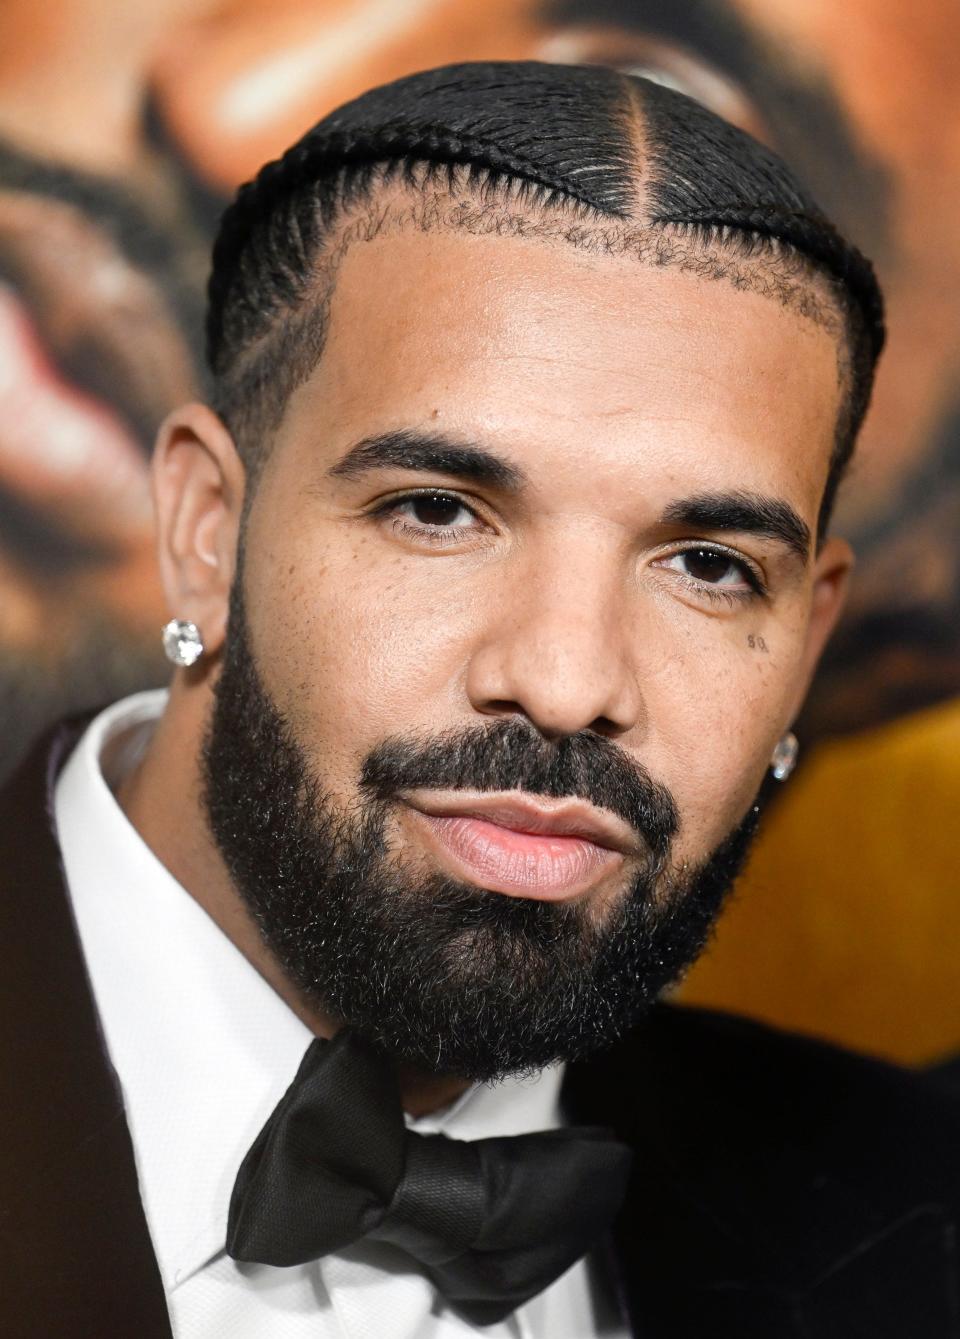 Drake attends the world premiere of "Amsterdam" at Alice Tully Hall on Sunday, Sept. 18, 2022, in New York. (Photo by Evan Agostini/Invision/AP)